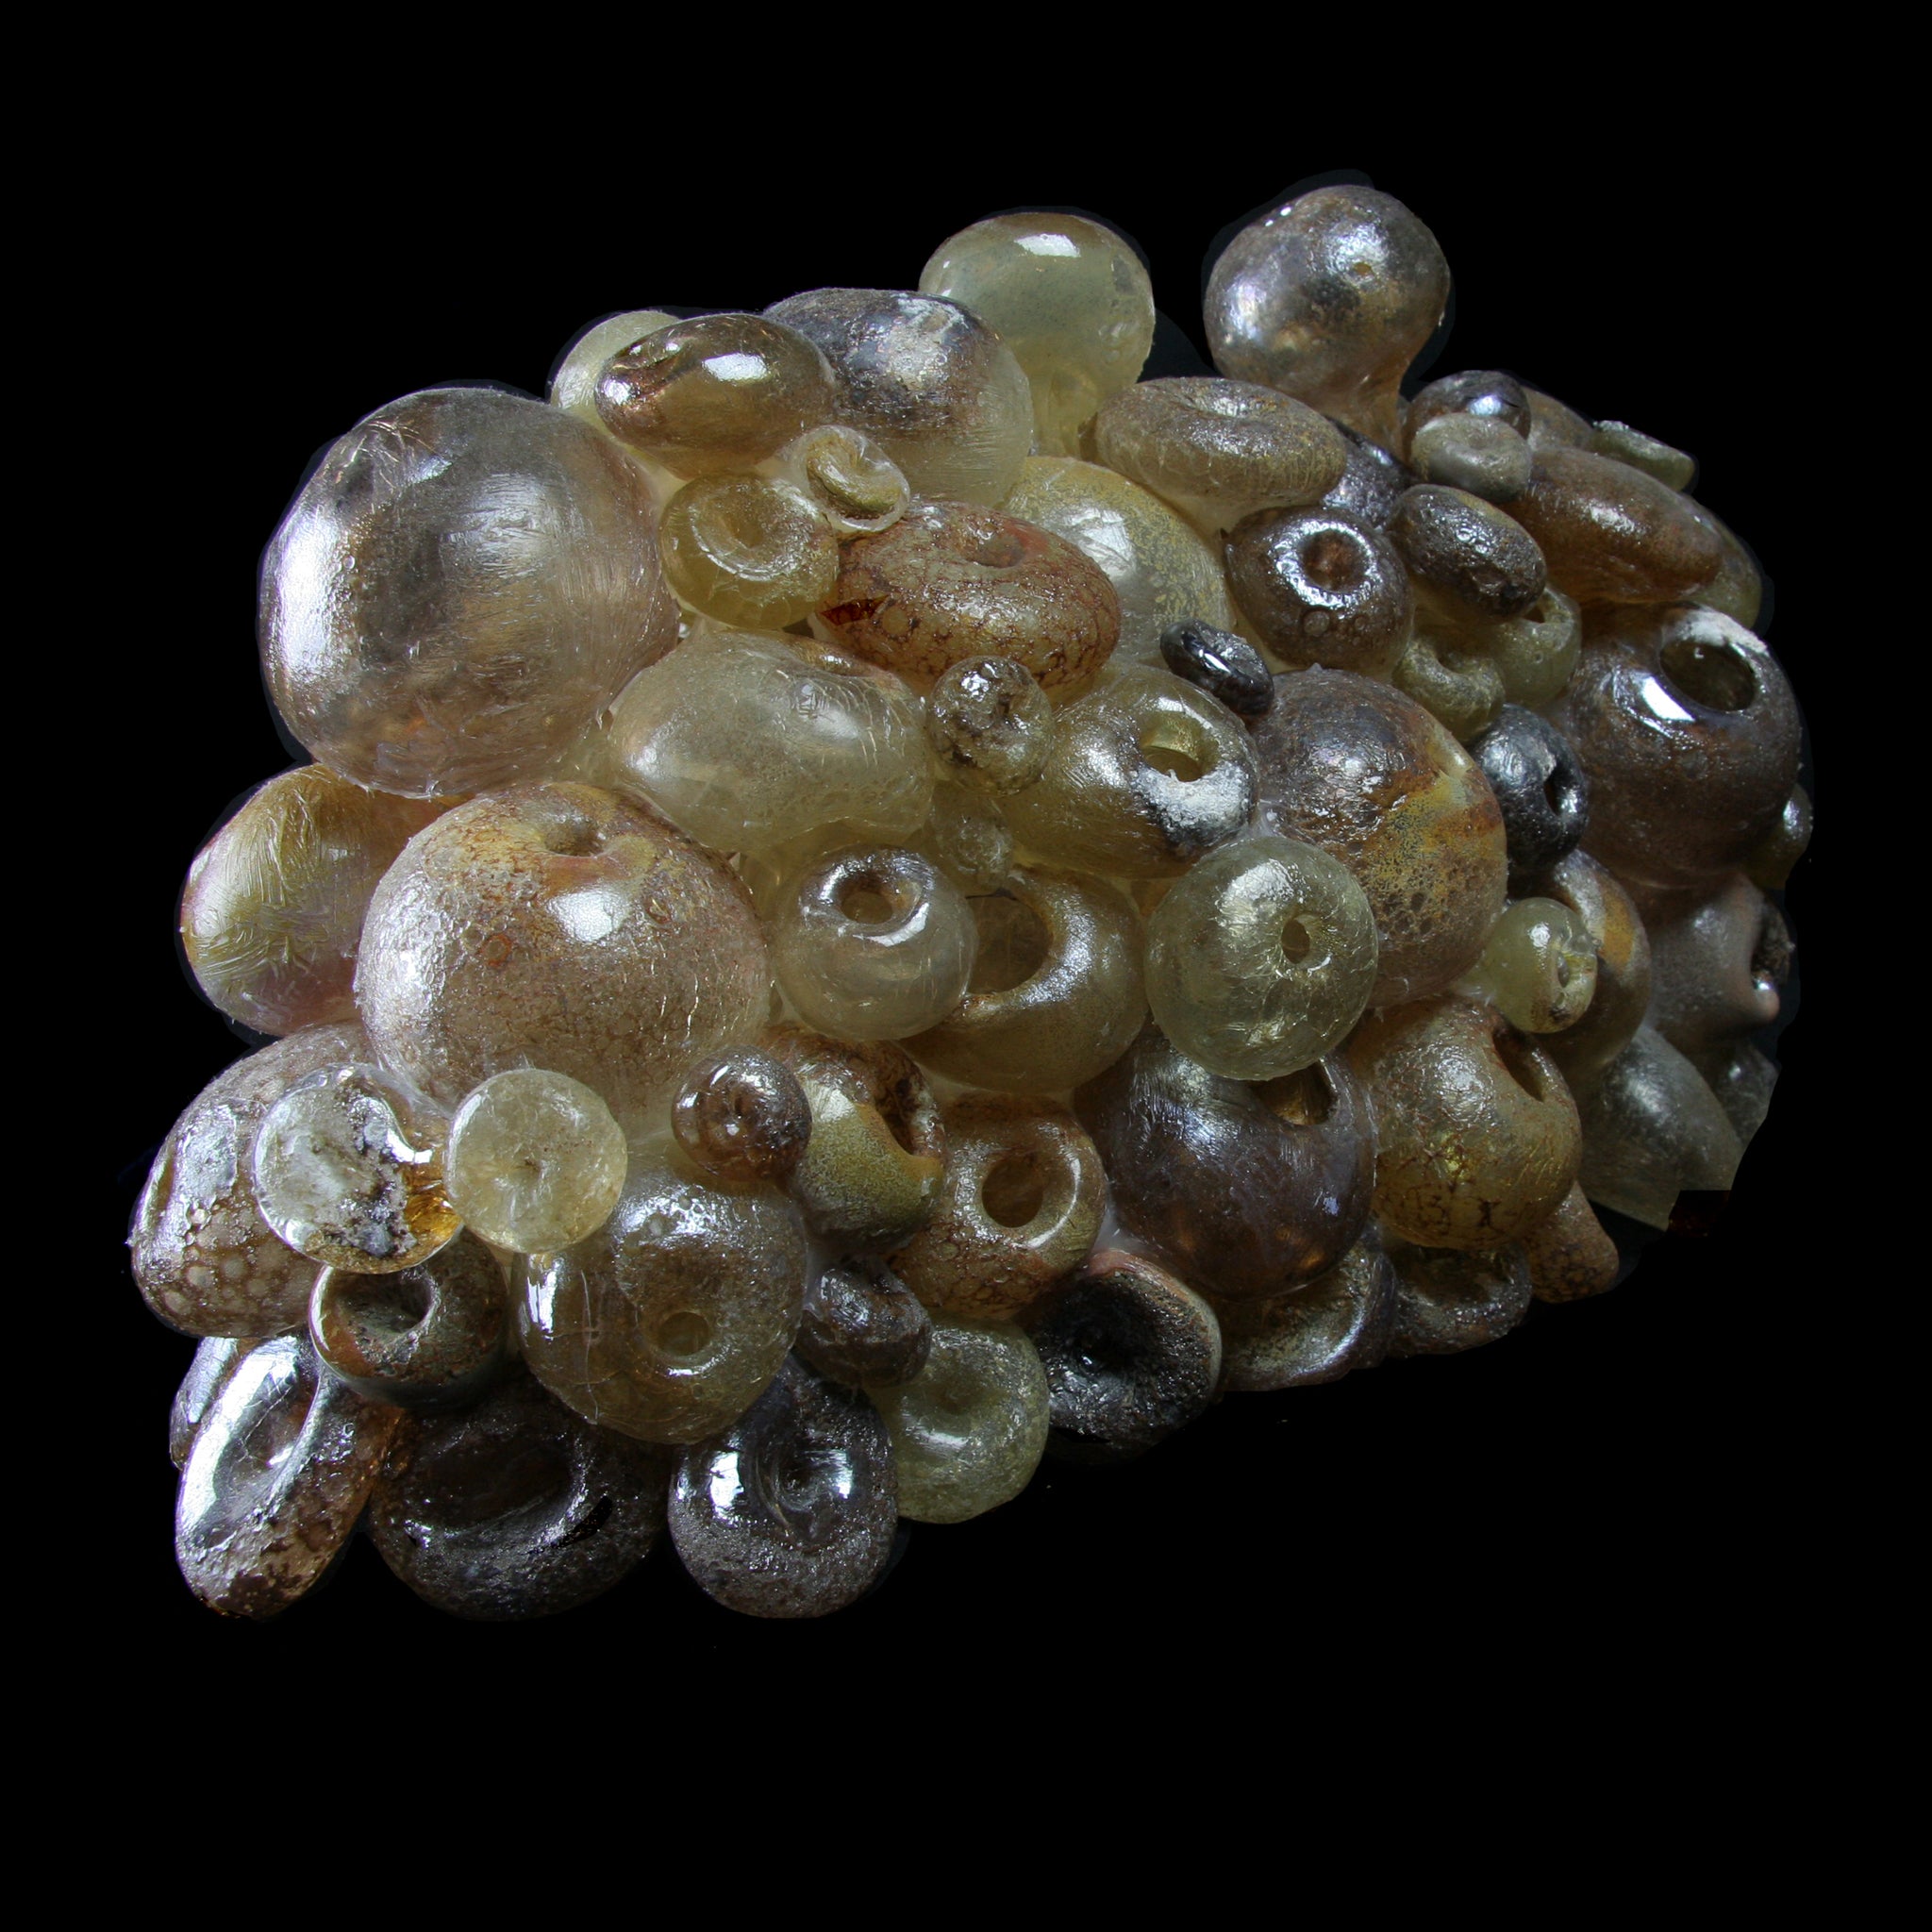 Back view of Large Brown Barnacle glass sculpture